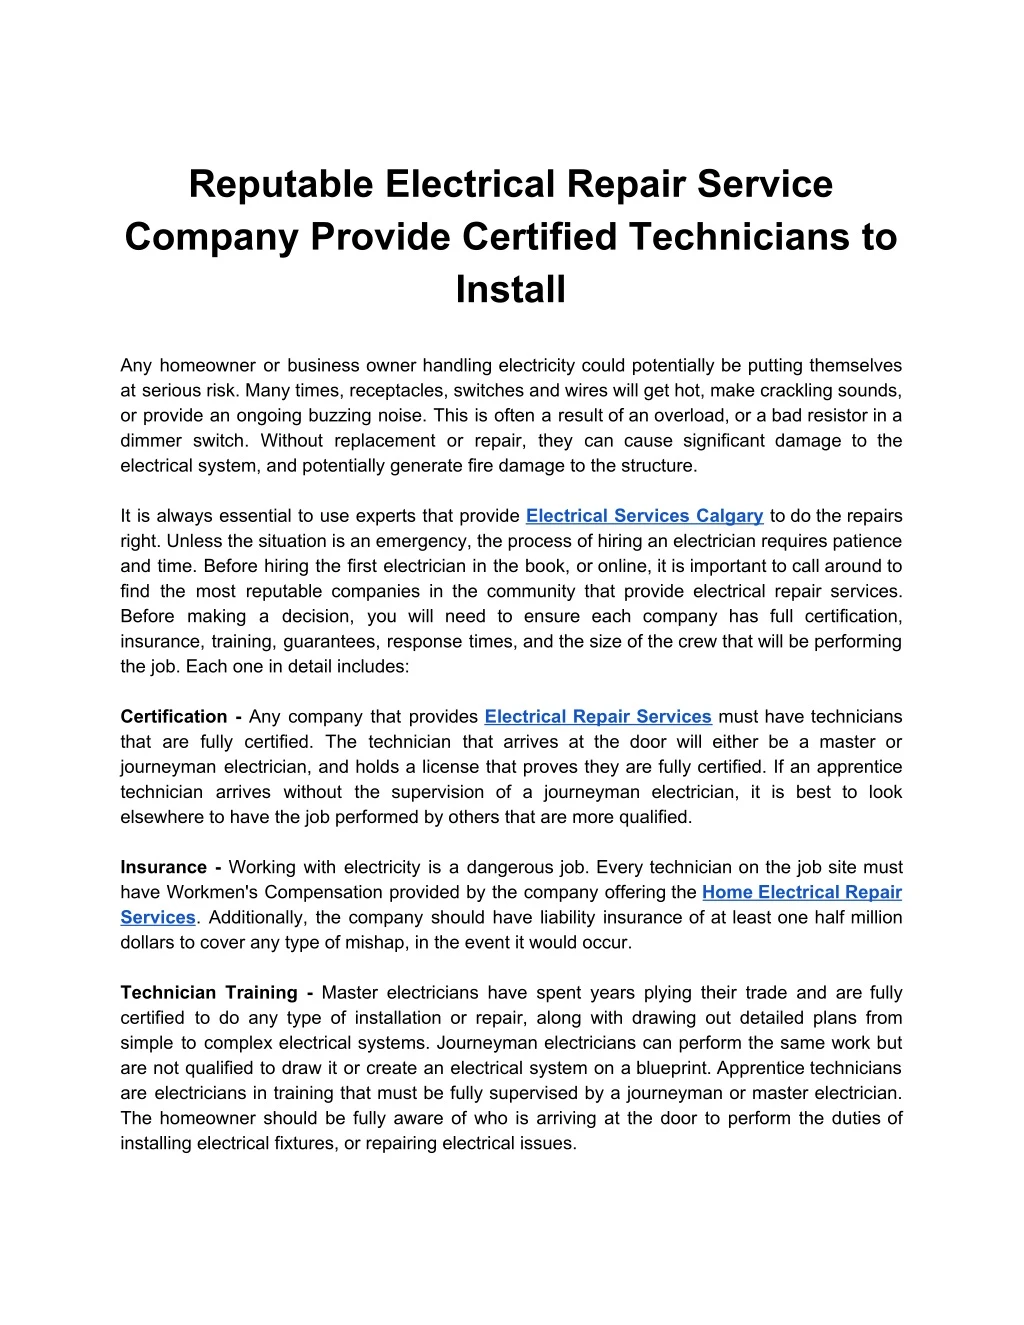 reputable electrical repair service company